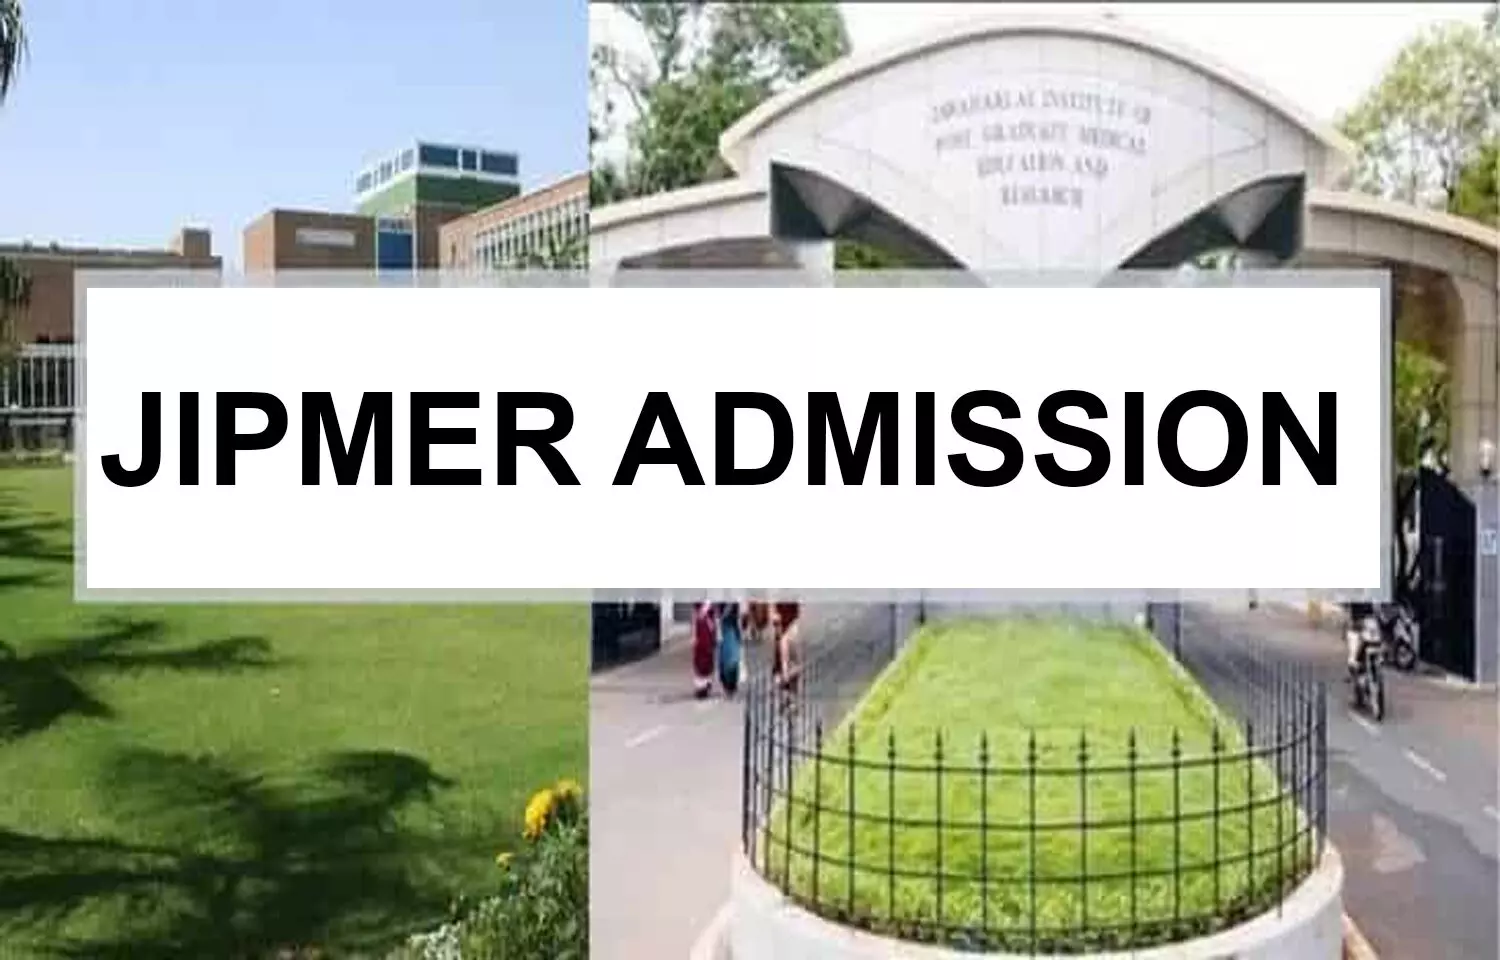 JIPMER reschedules entrance exam for Post-Doctoral Fellowship, Post-Doctoral Certificate Courses July 2022, Admit card released